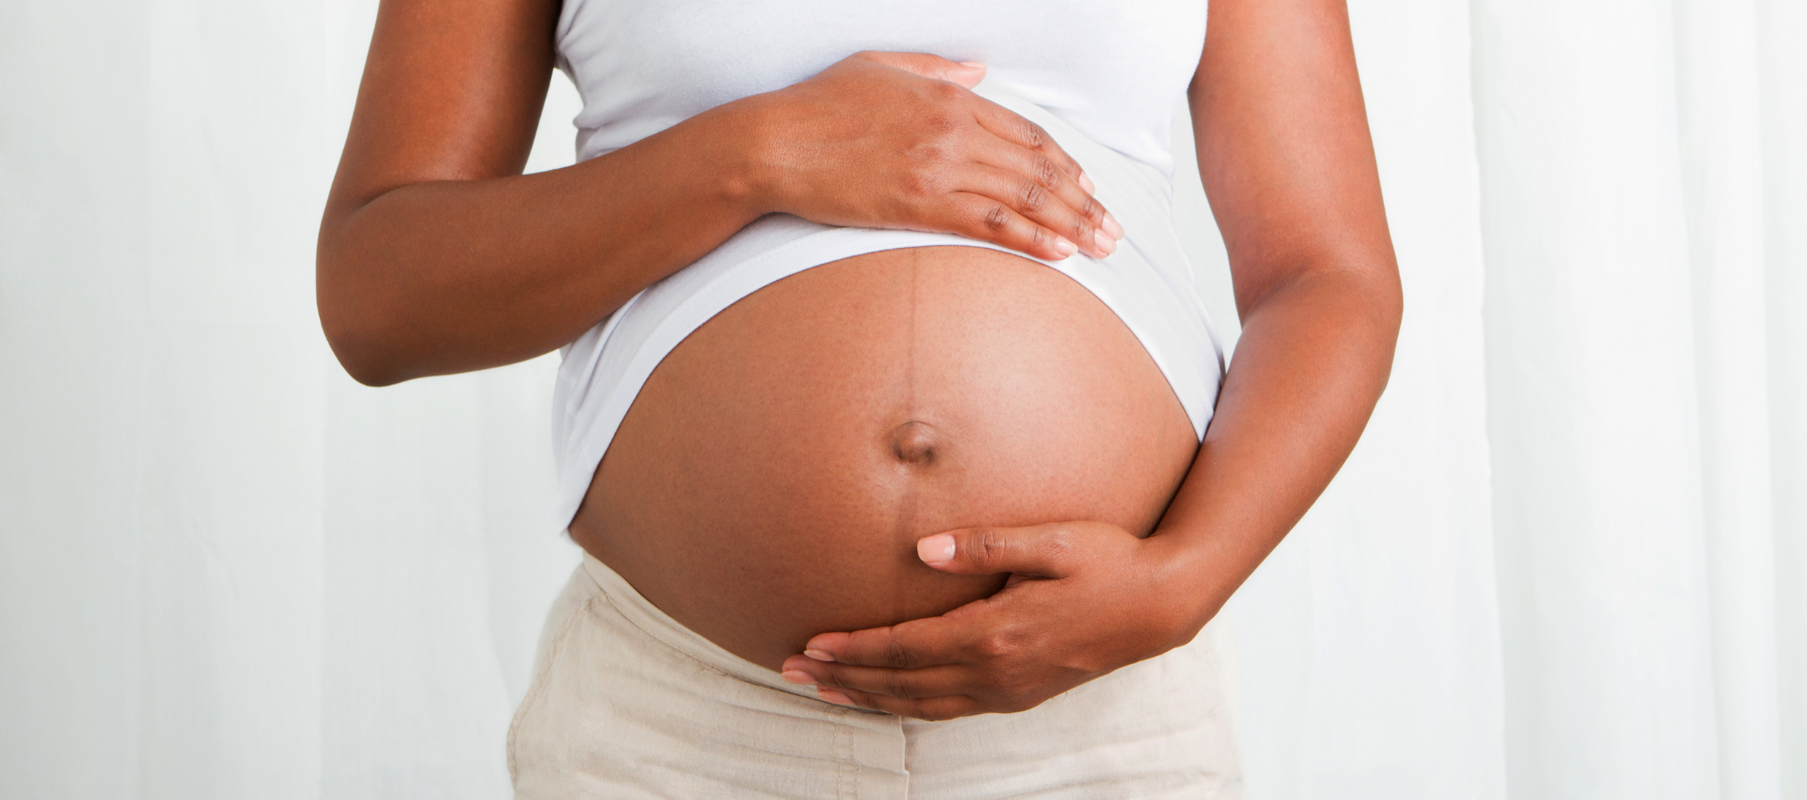 10 Things Women Need While They Are Pregnant (Beyond Their